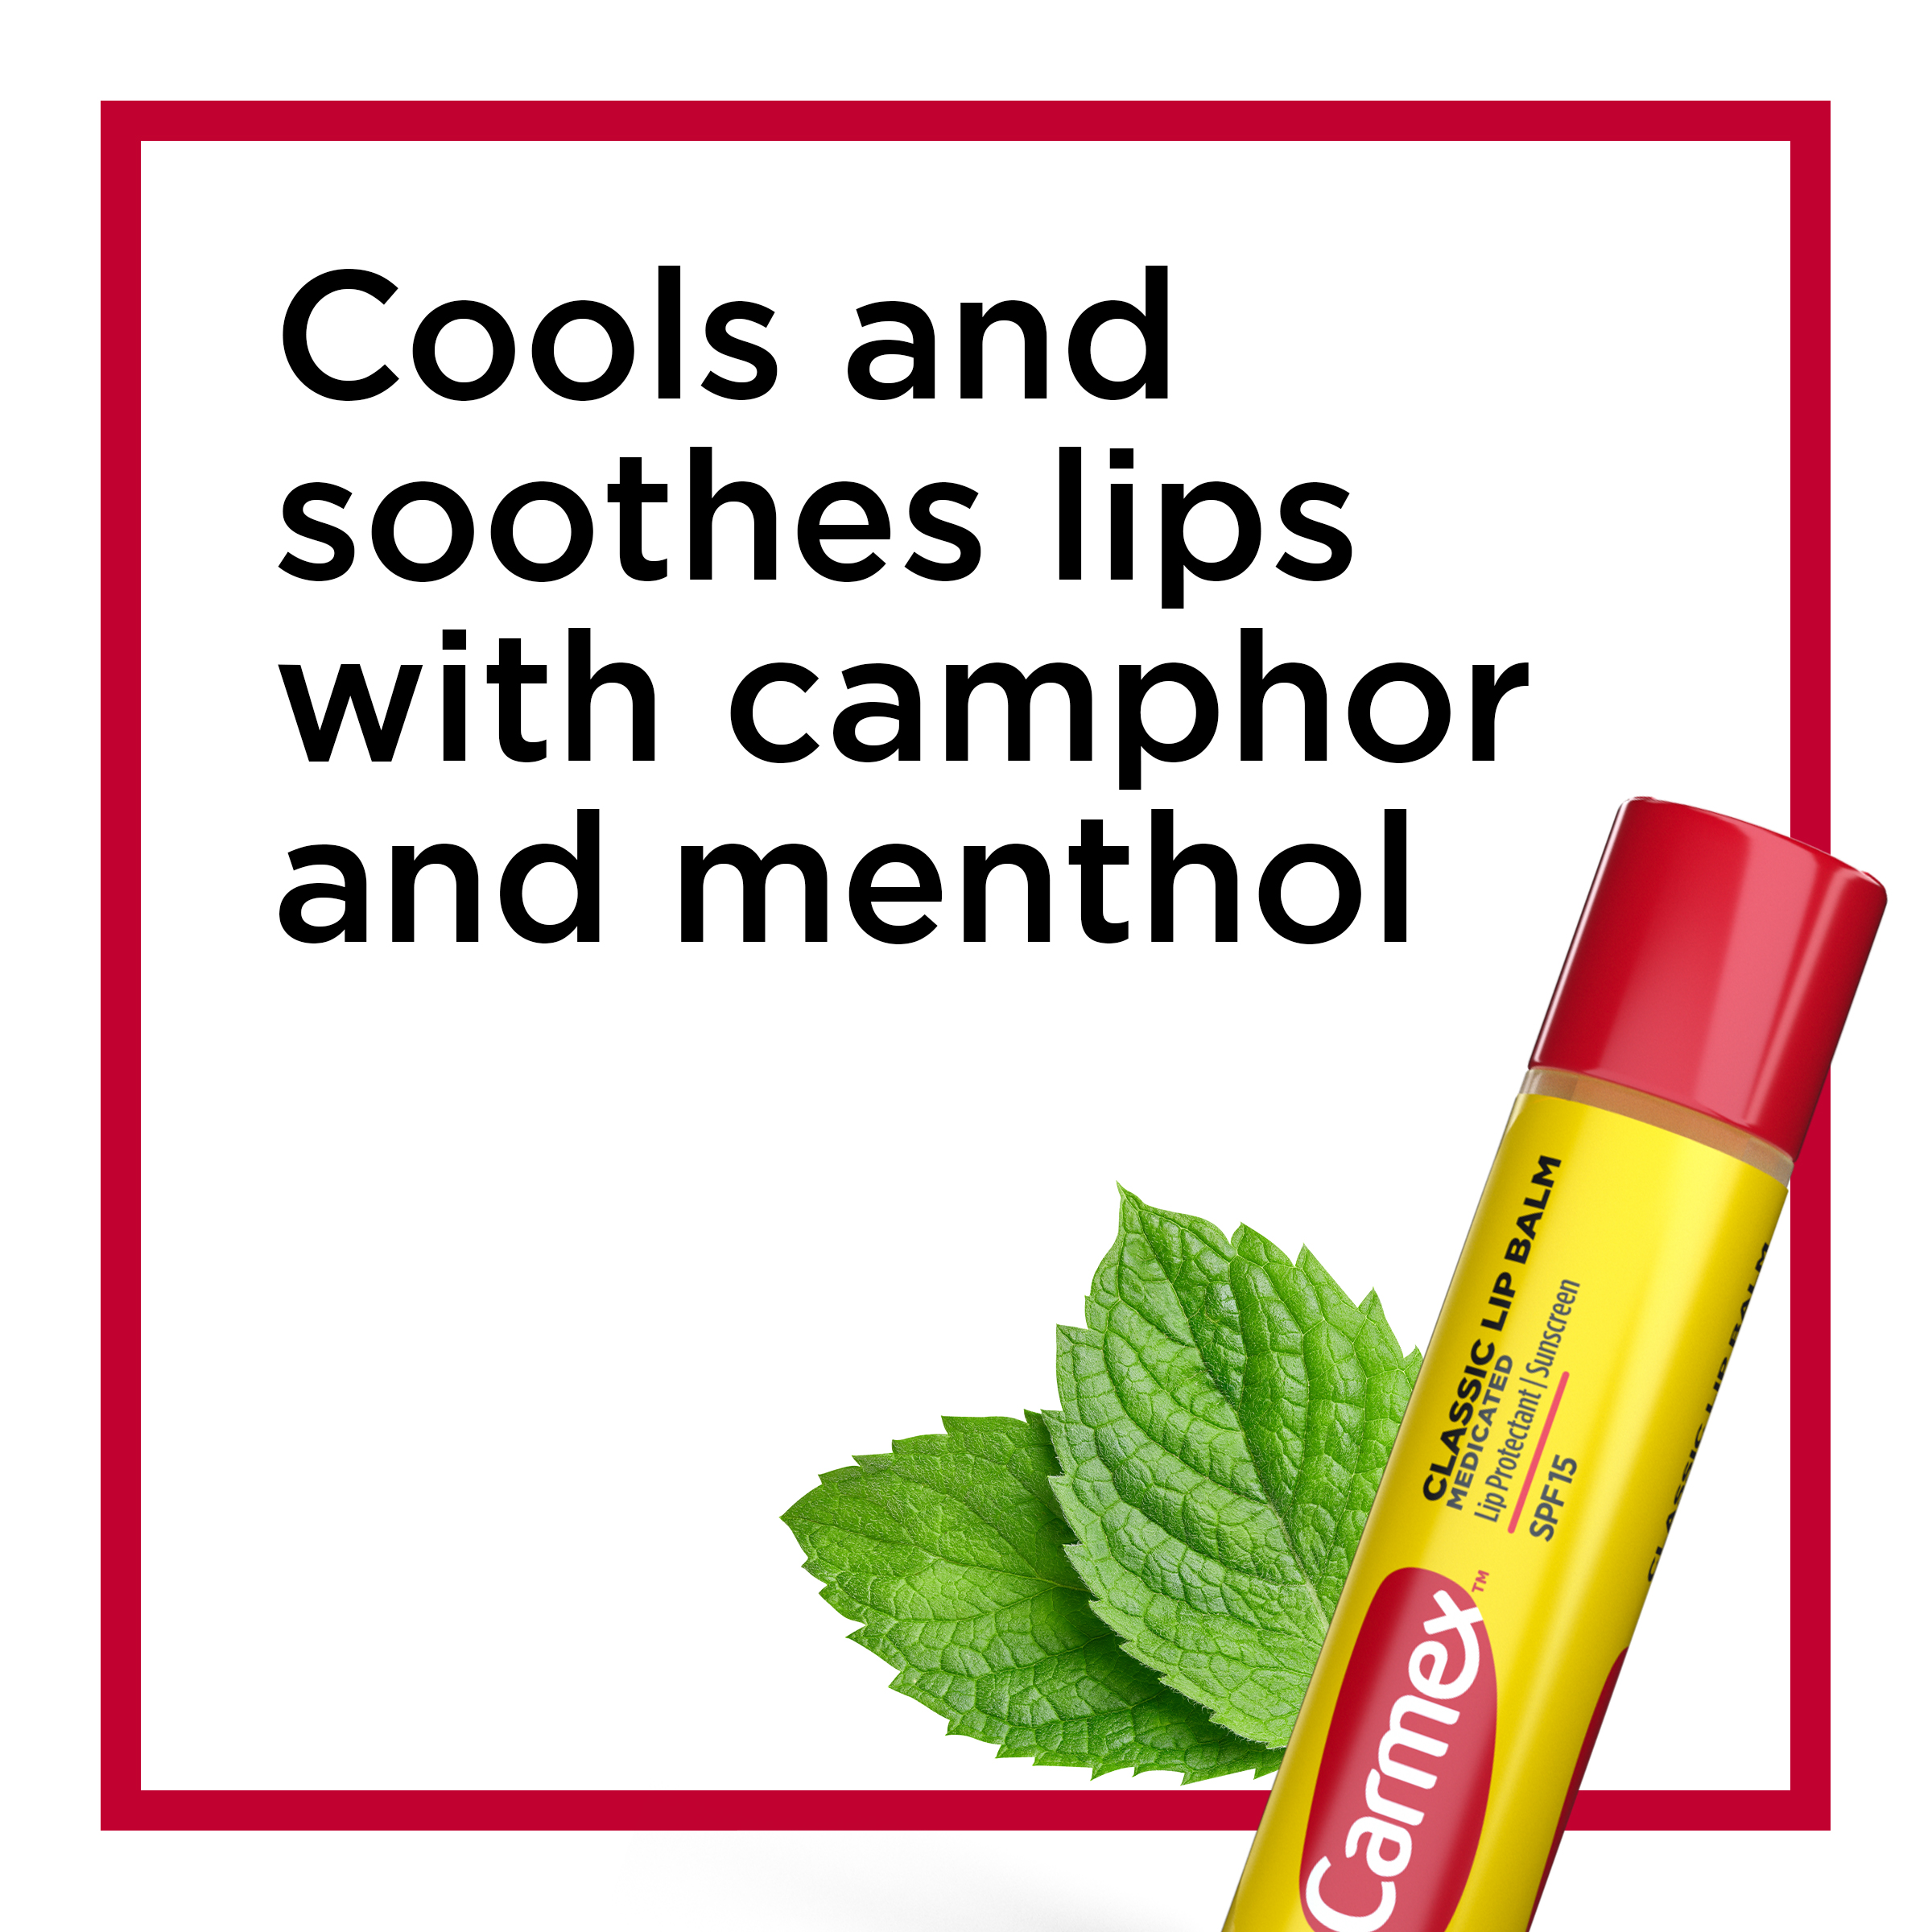 Carmex Moisturizing Medicated Lip Balm with Cocoa Butter, Camphor & Menthol, Multi-Flavor, 24 Pack - image 6 of 11